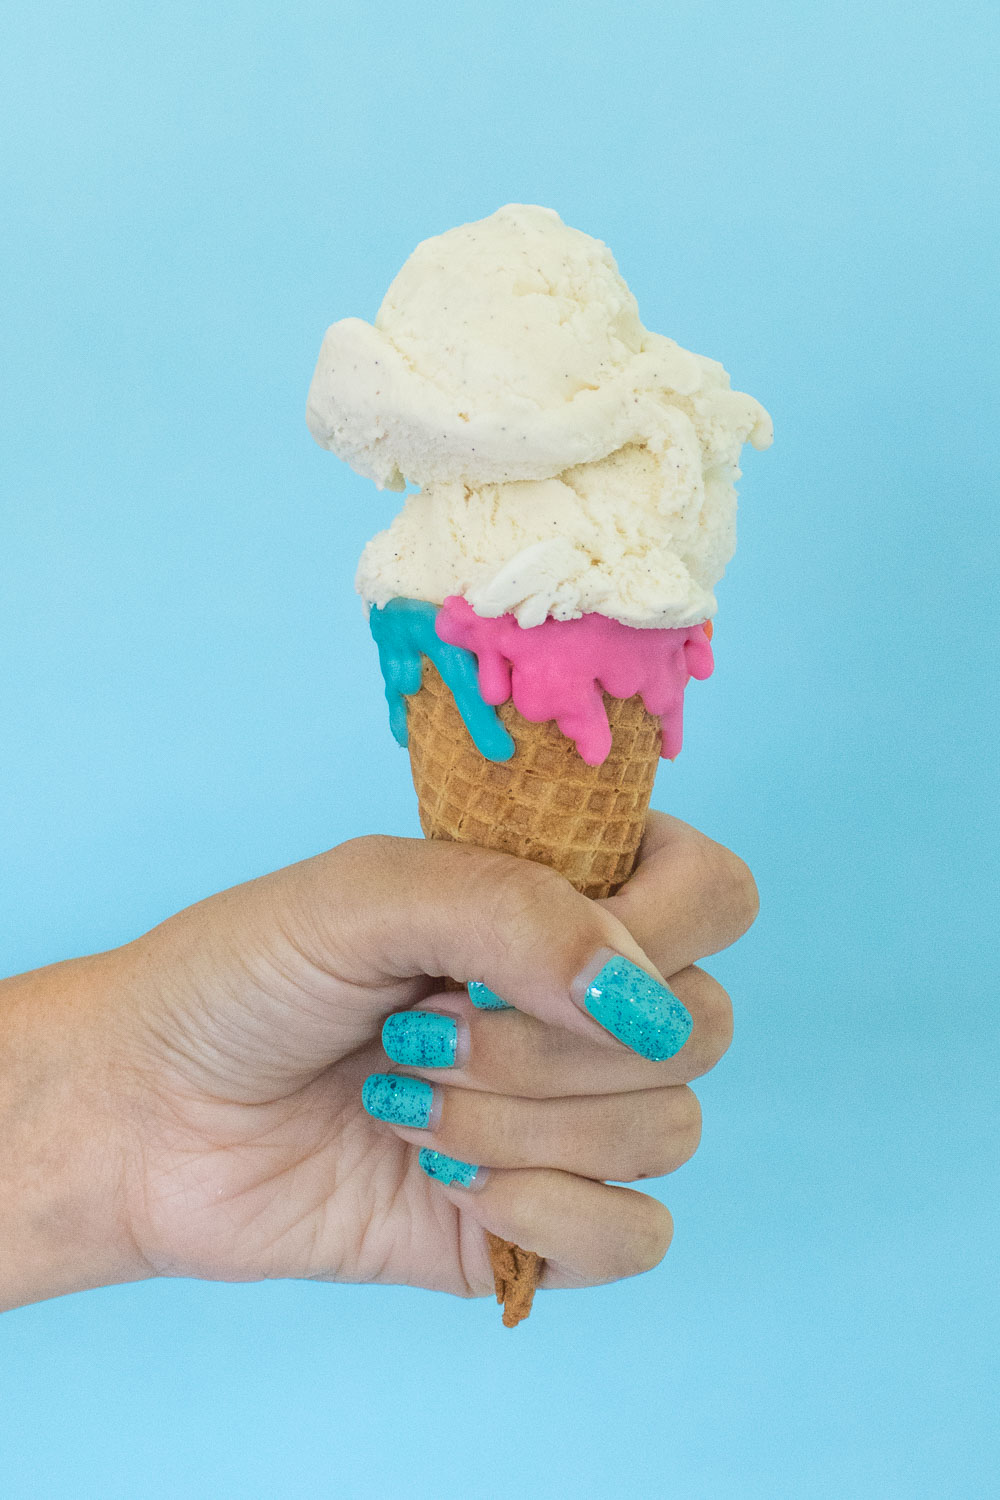 DIY Colorful Dripped Ice Cream Cones | Club Crafted